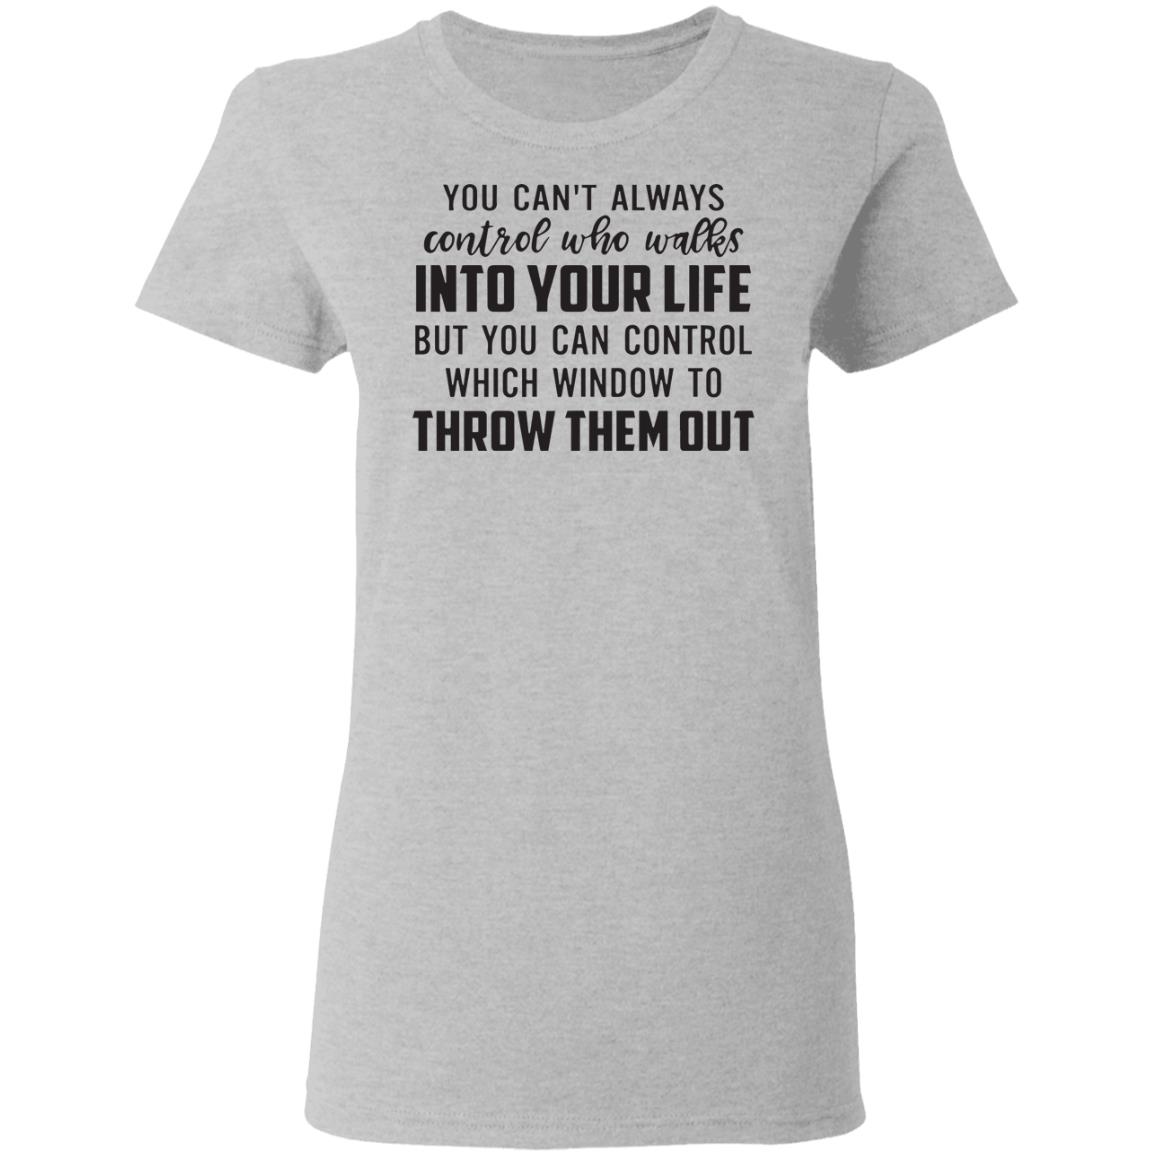 You can't always control who walks into your life shirt - Rockatee